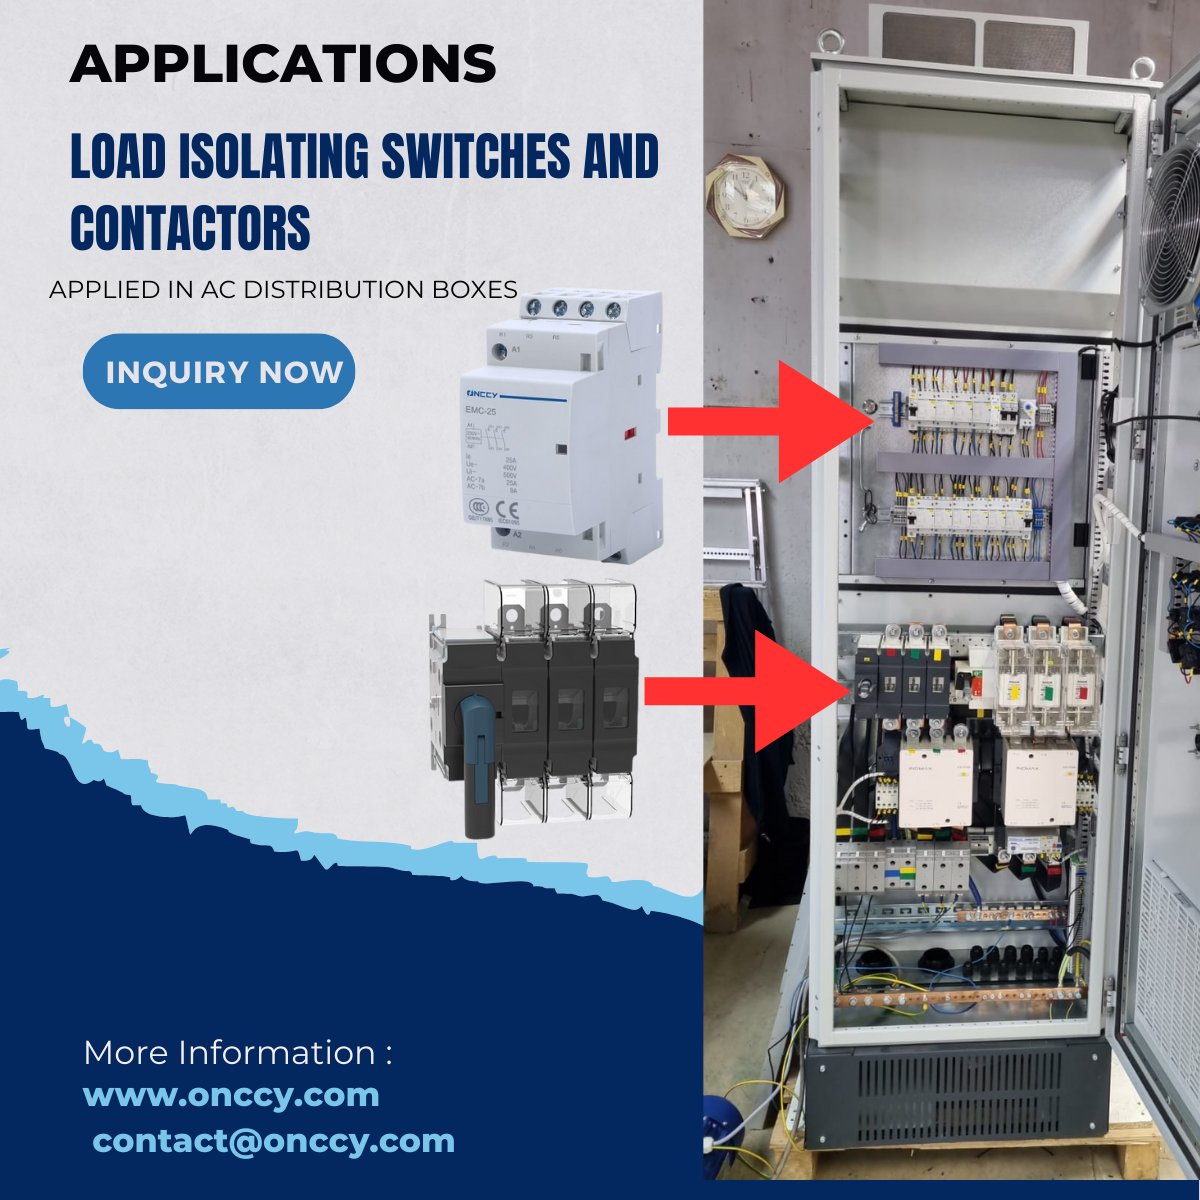 We're excited to share that our latest application cases have been a resounding success! The ONCCY AC Load Isolation Switch and Contactor are now seamlessly integrated into AC energy storage cabinets, receiving outstanding feedback from our partners. 🚀
#pvsolar